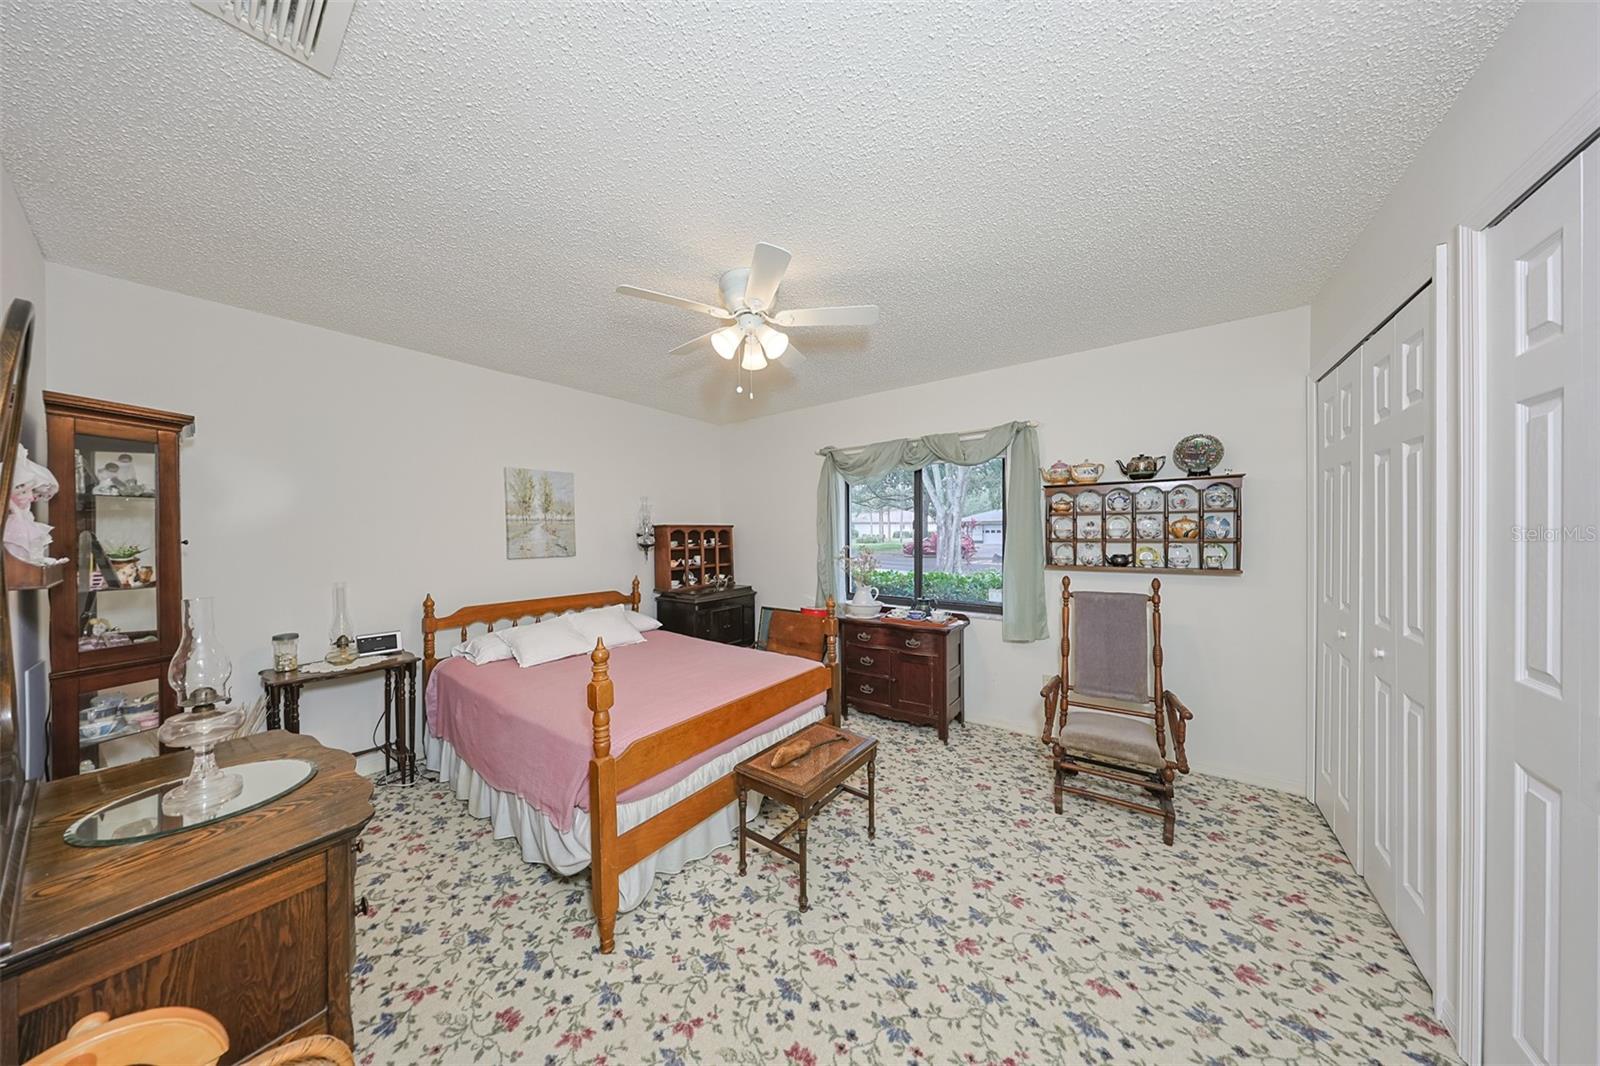 GUEST BEDROOM WITH WELCOMING CARPET, DOUBLE CLOSETS